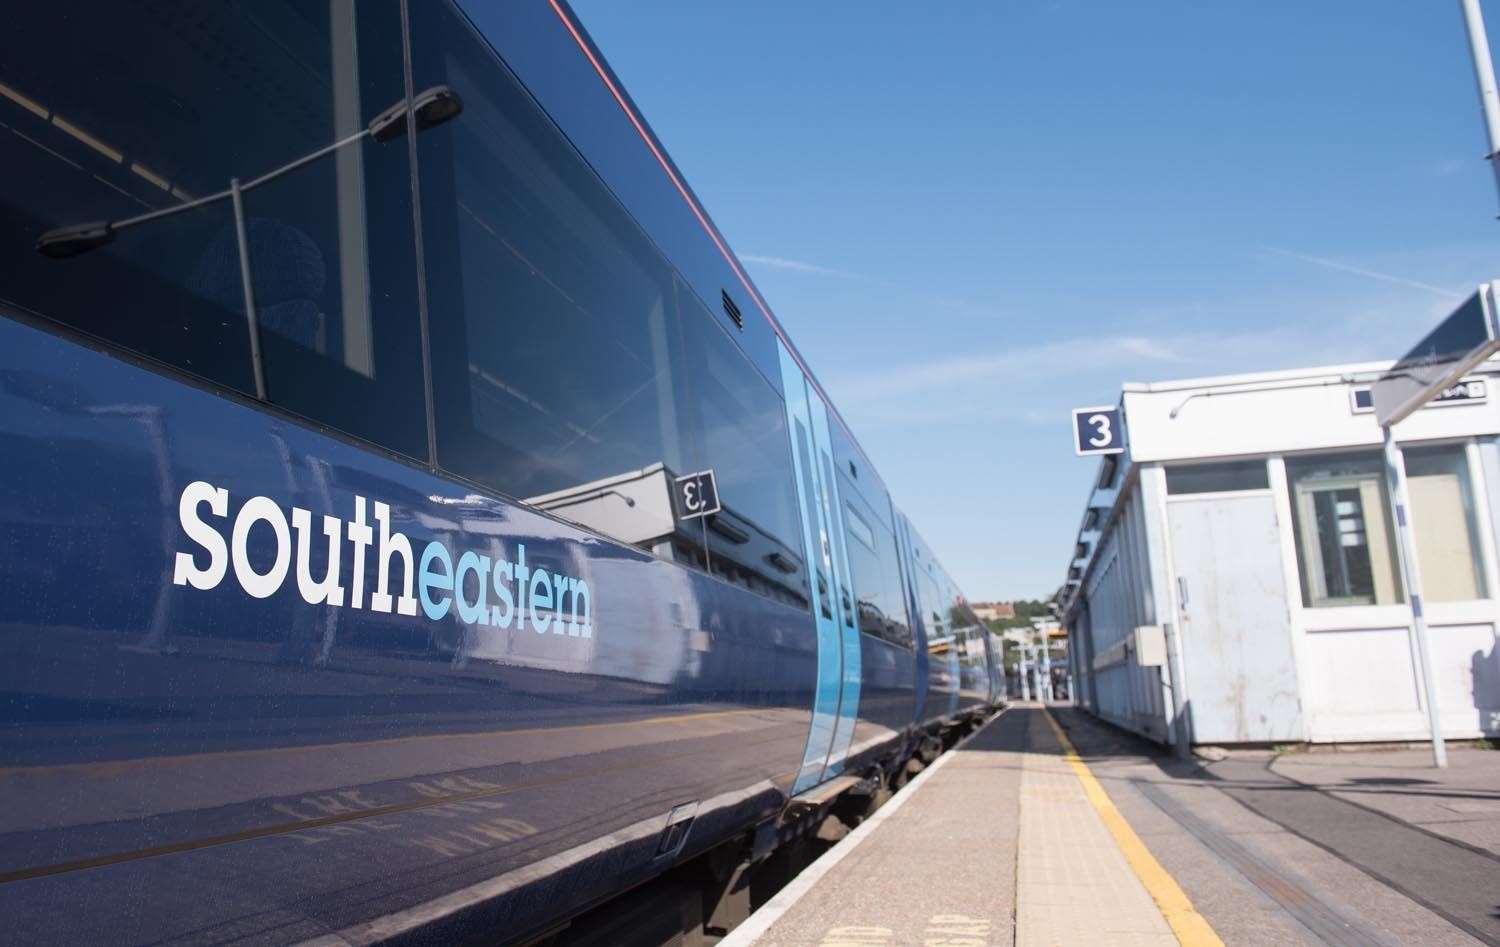 Southeastern is diverting services after flooding in Orpington